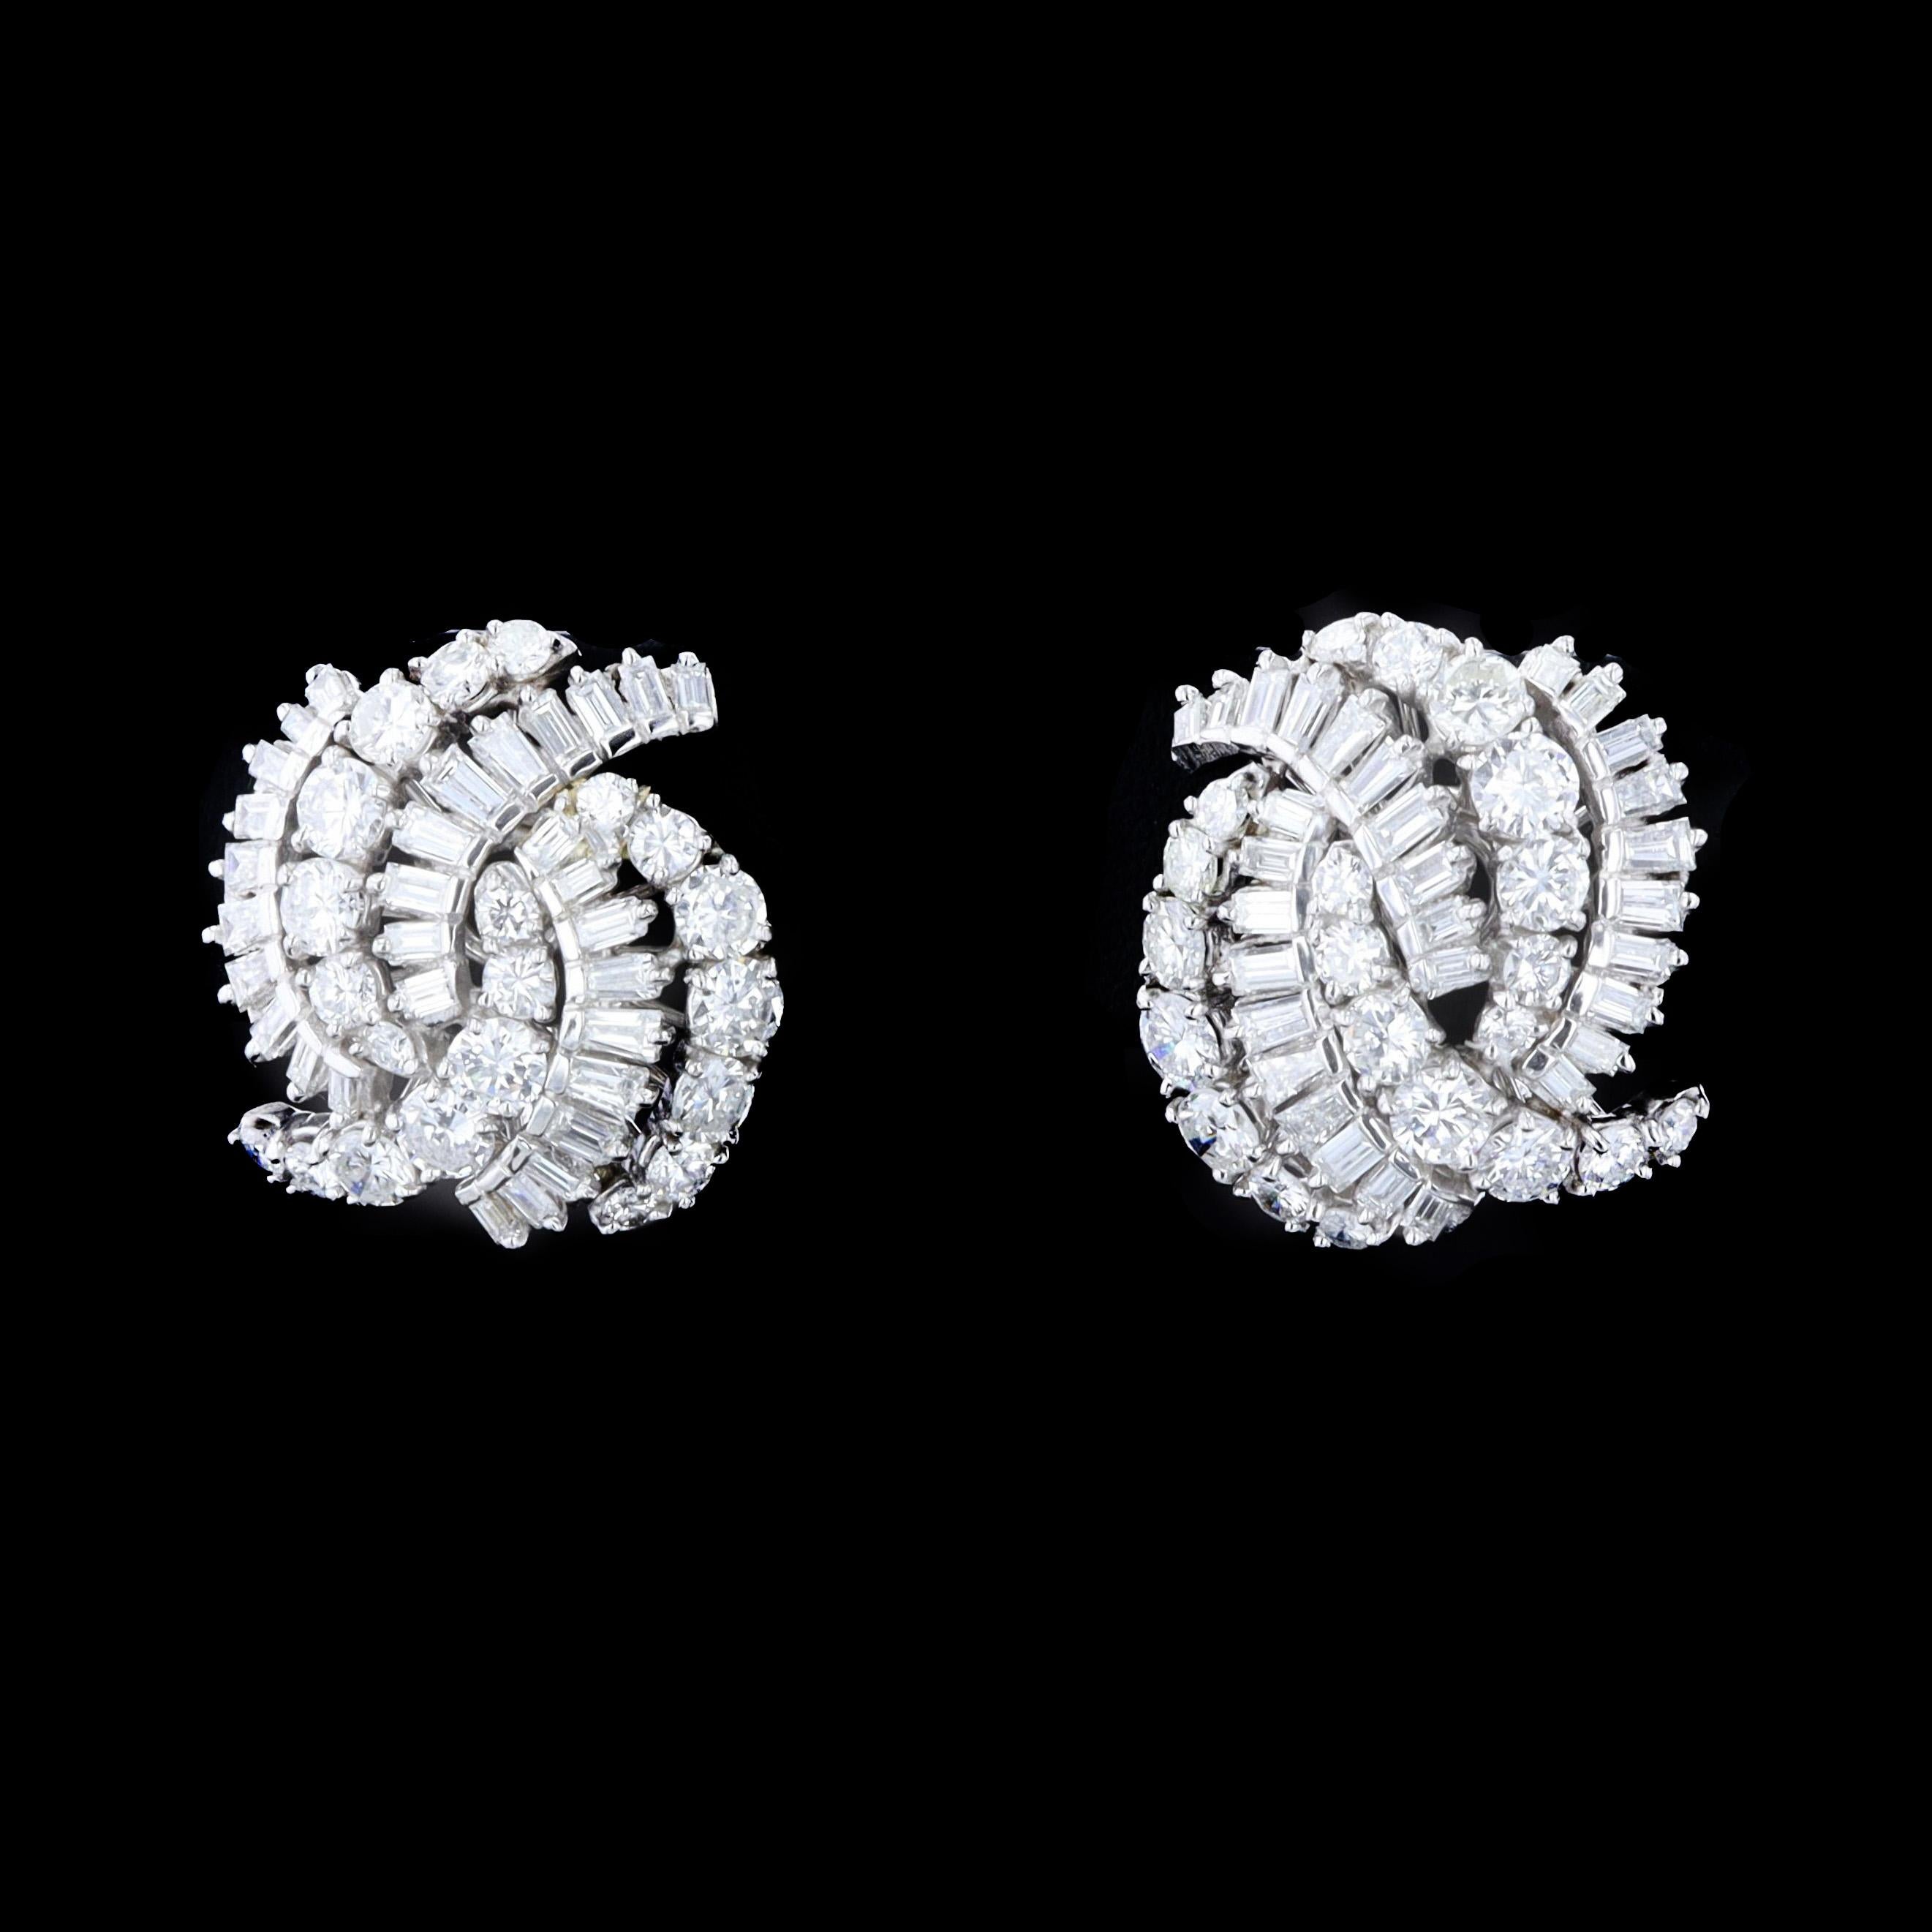 Round Cut Sparkling Diamond Estate Earrings For Sale